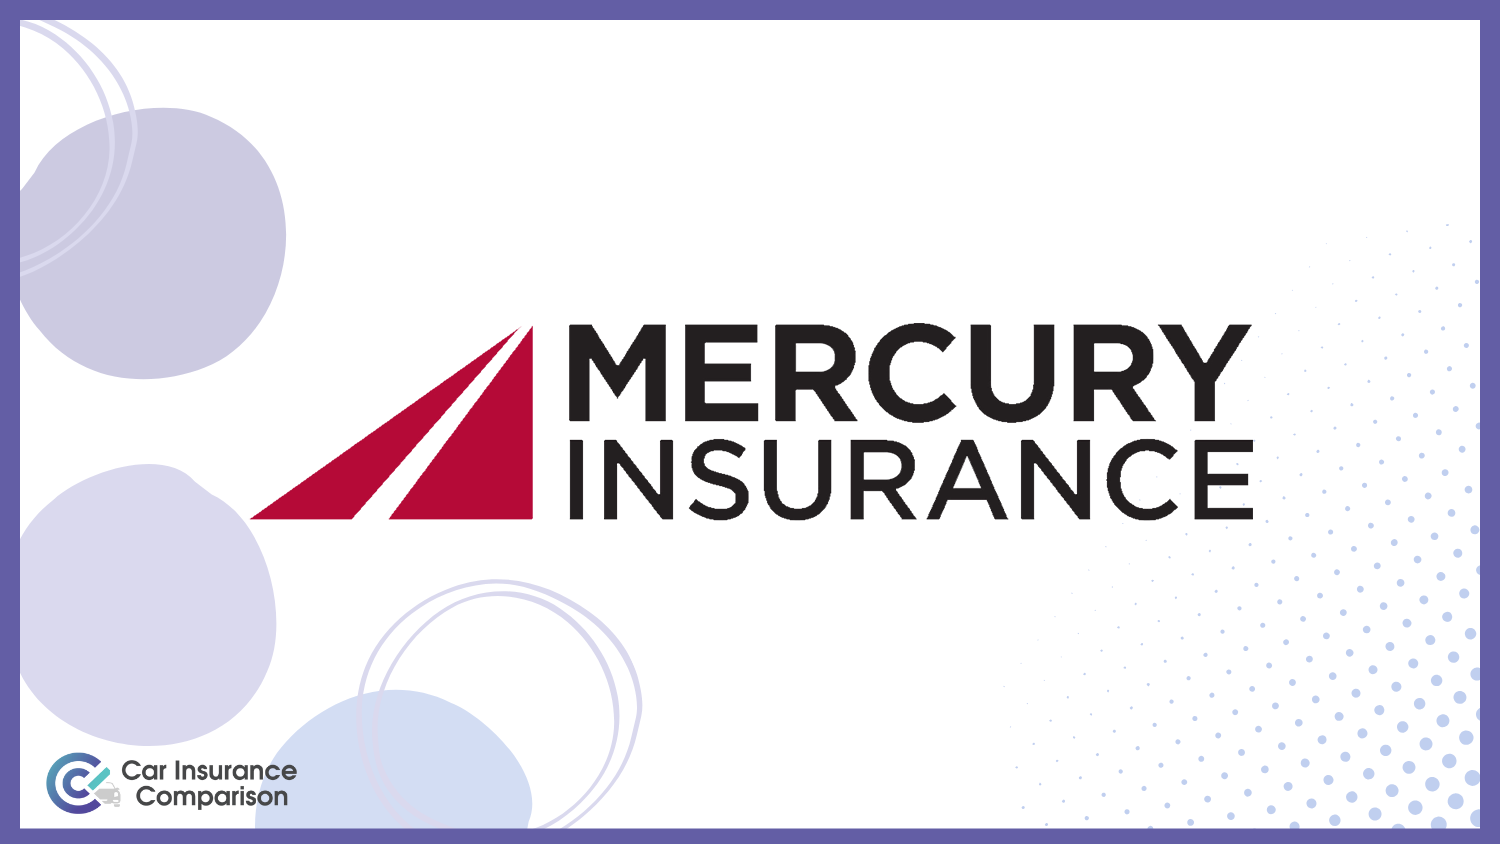 Mercury: Best Car Insurance for Customer Service Occupations